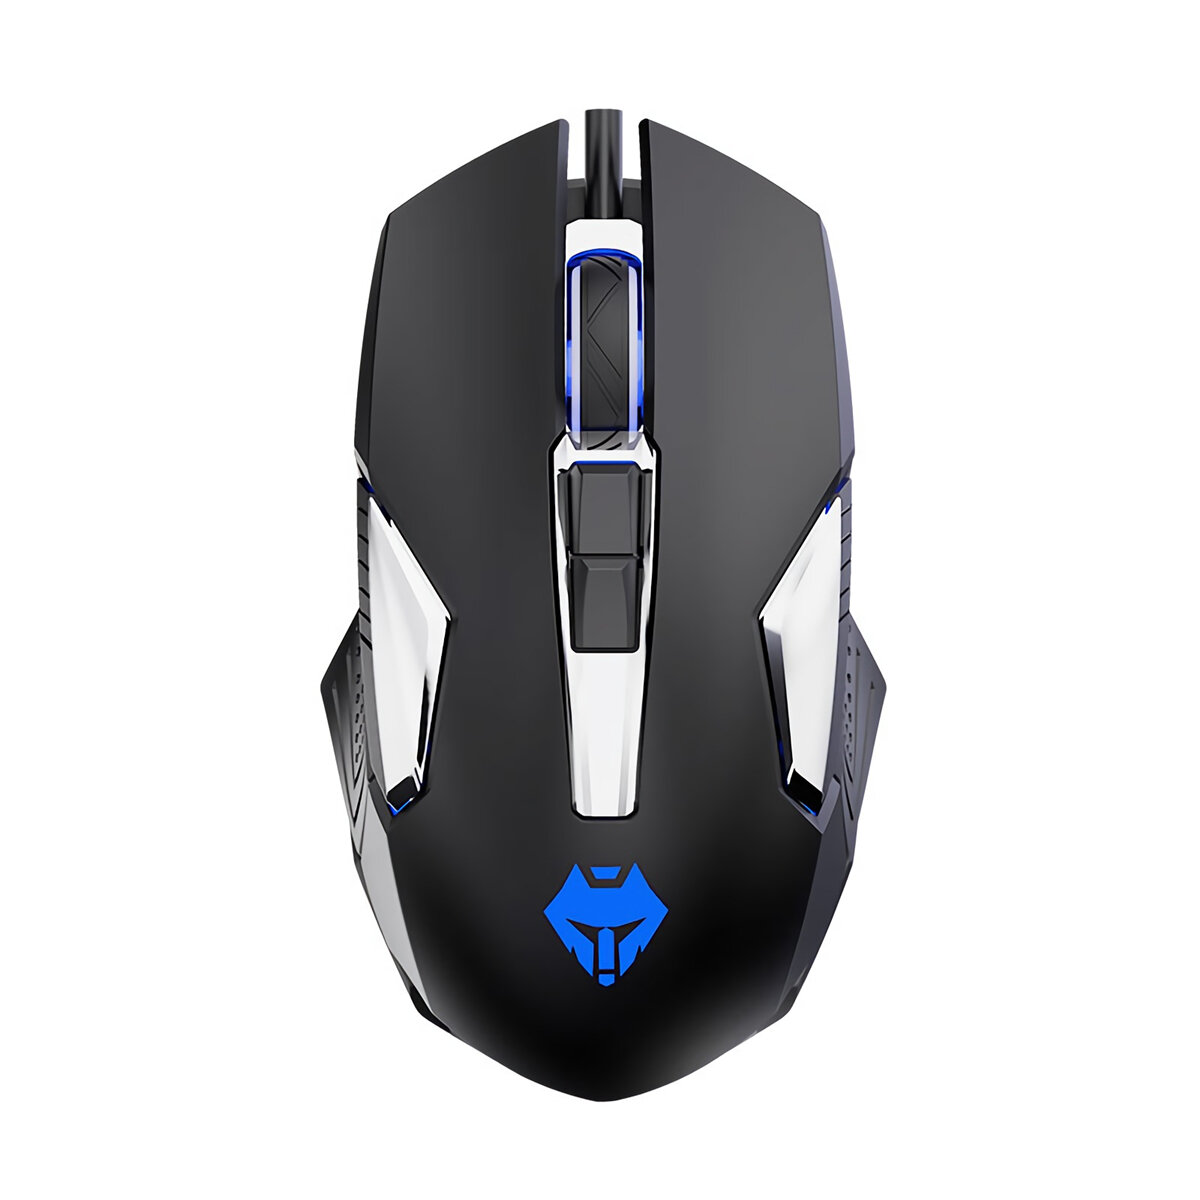 Langtu 509 Gaming Mouse USB Wired 3200DPI 8 Buttons Mechanical Mouse LED Optical Game Mouse For PC C